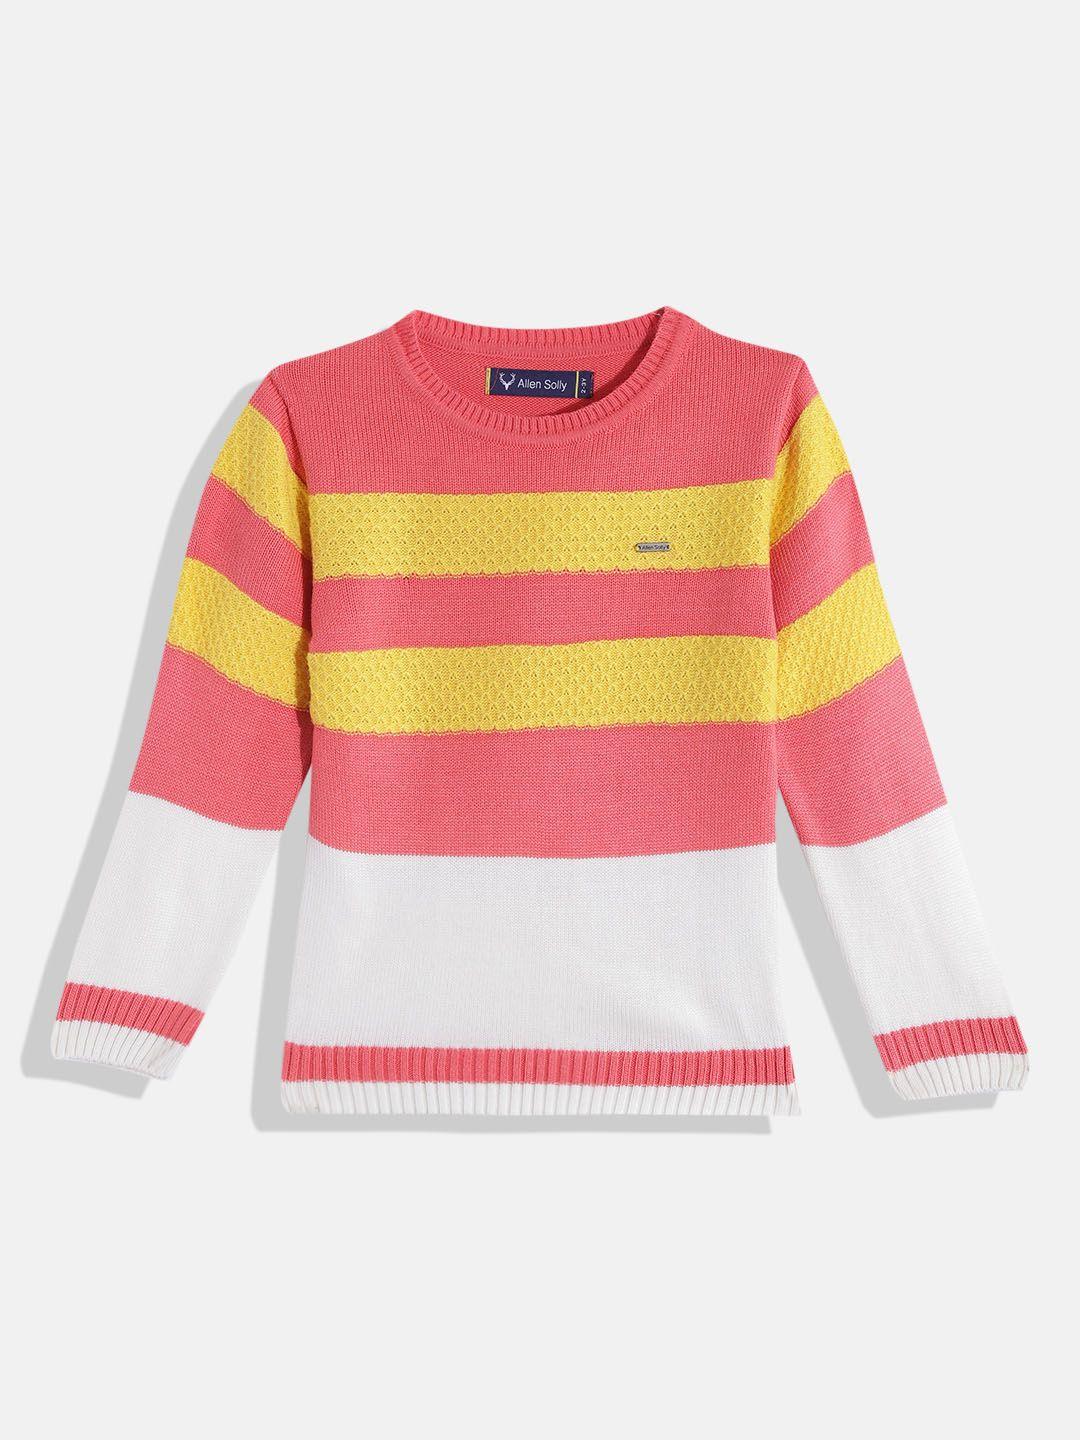 allen solly junior boys pink & yellow striped pullover